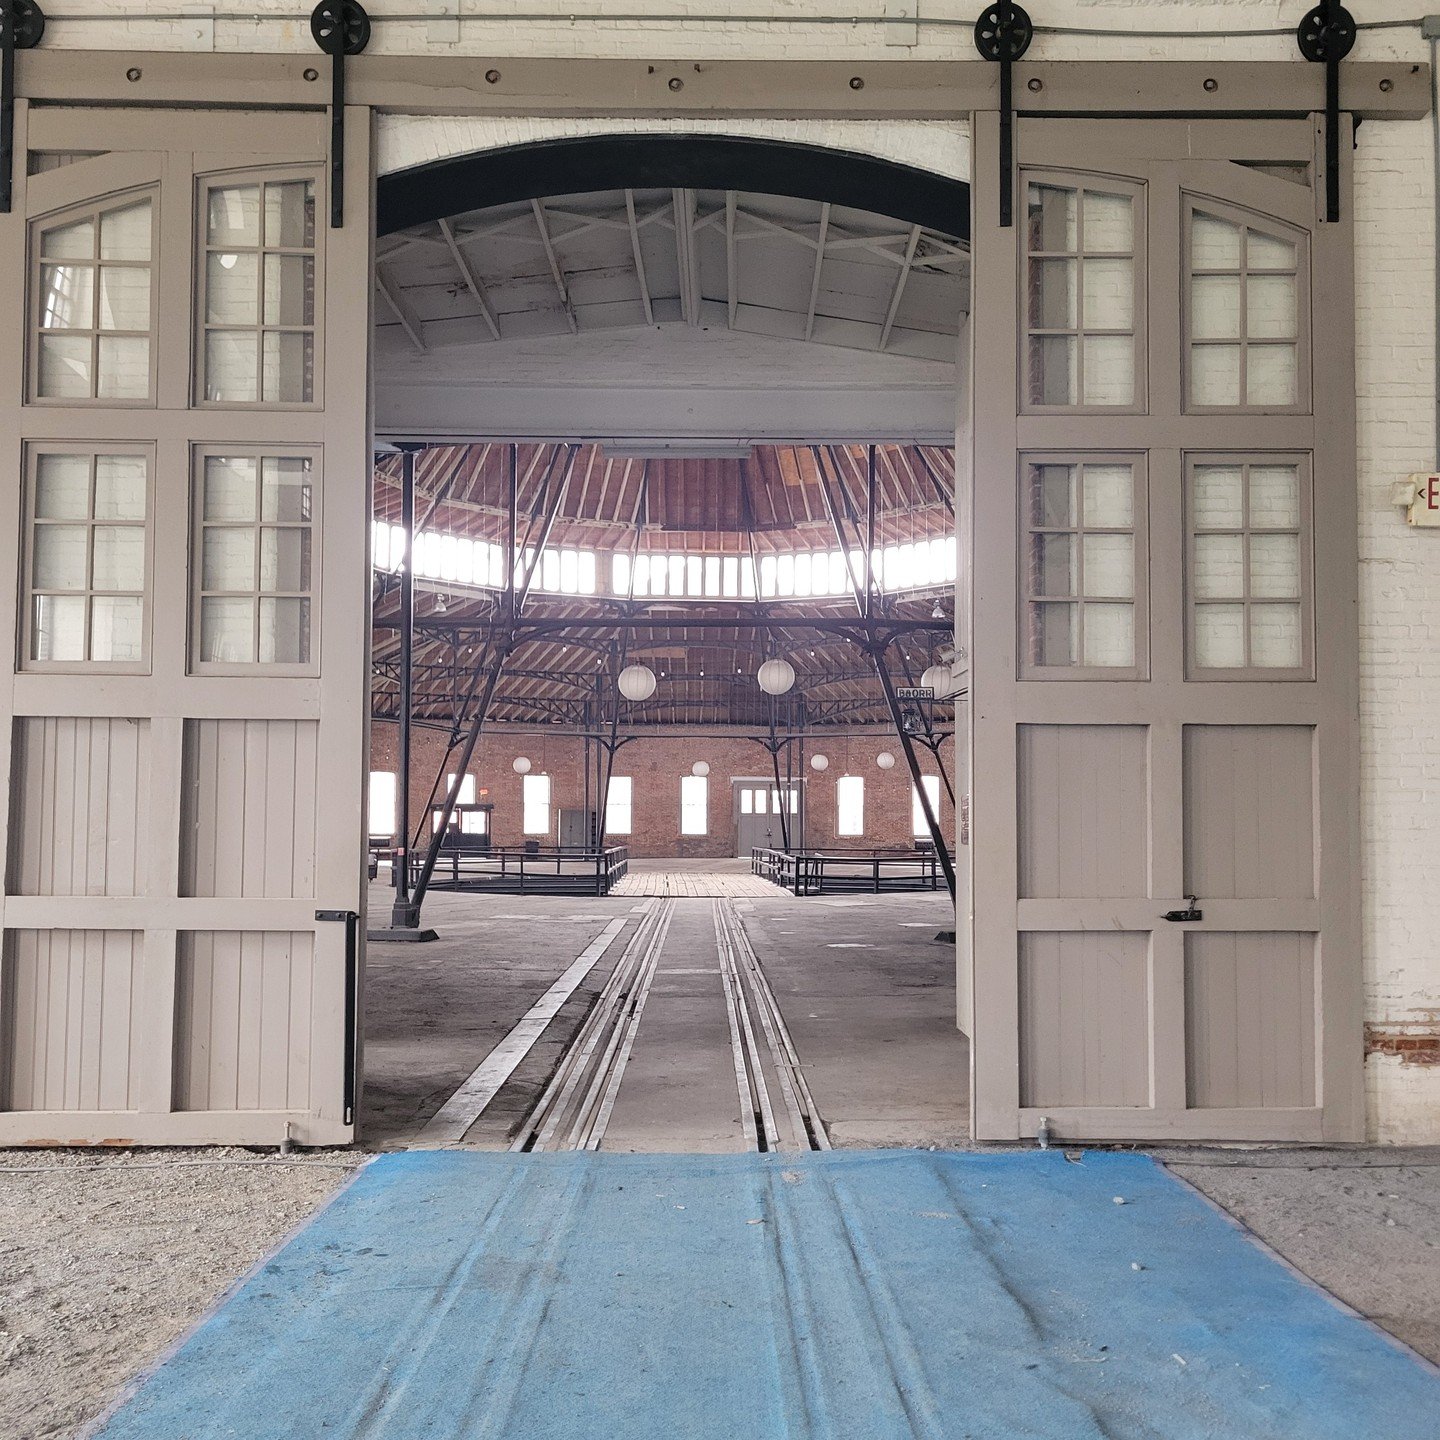 Martinsburg Roundhouse.

Plan to visit them on Saturdays for the Martinsburg Farmers Market at the Roundhouse. Visit https://www.roundhousewv.com/events for more information.

#MuseumMonday #visitmartinsburgwv #berkeleycountywv #almostheaven